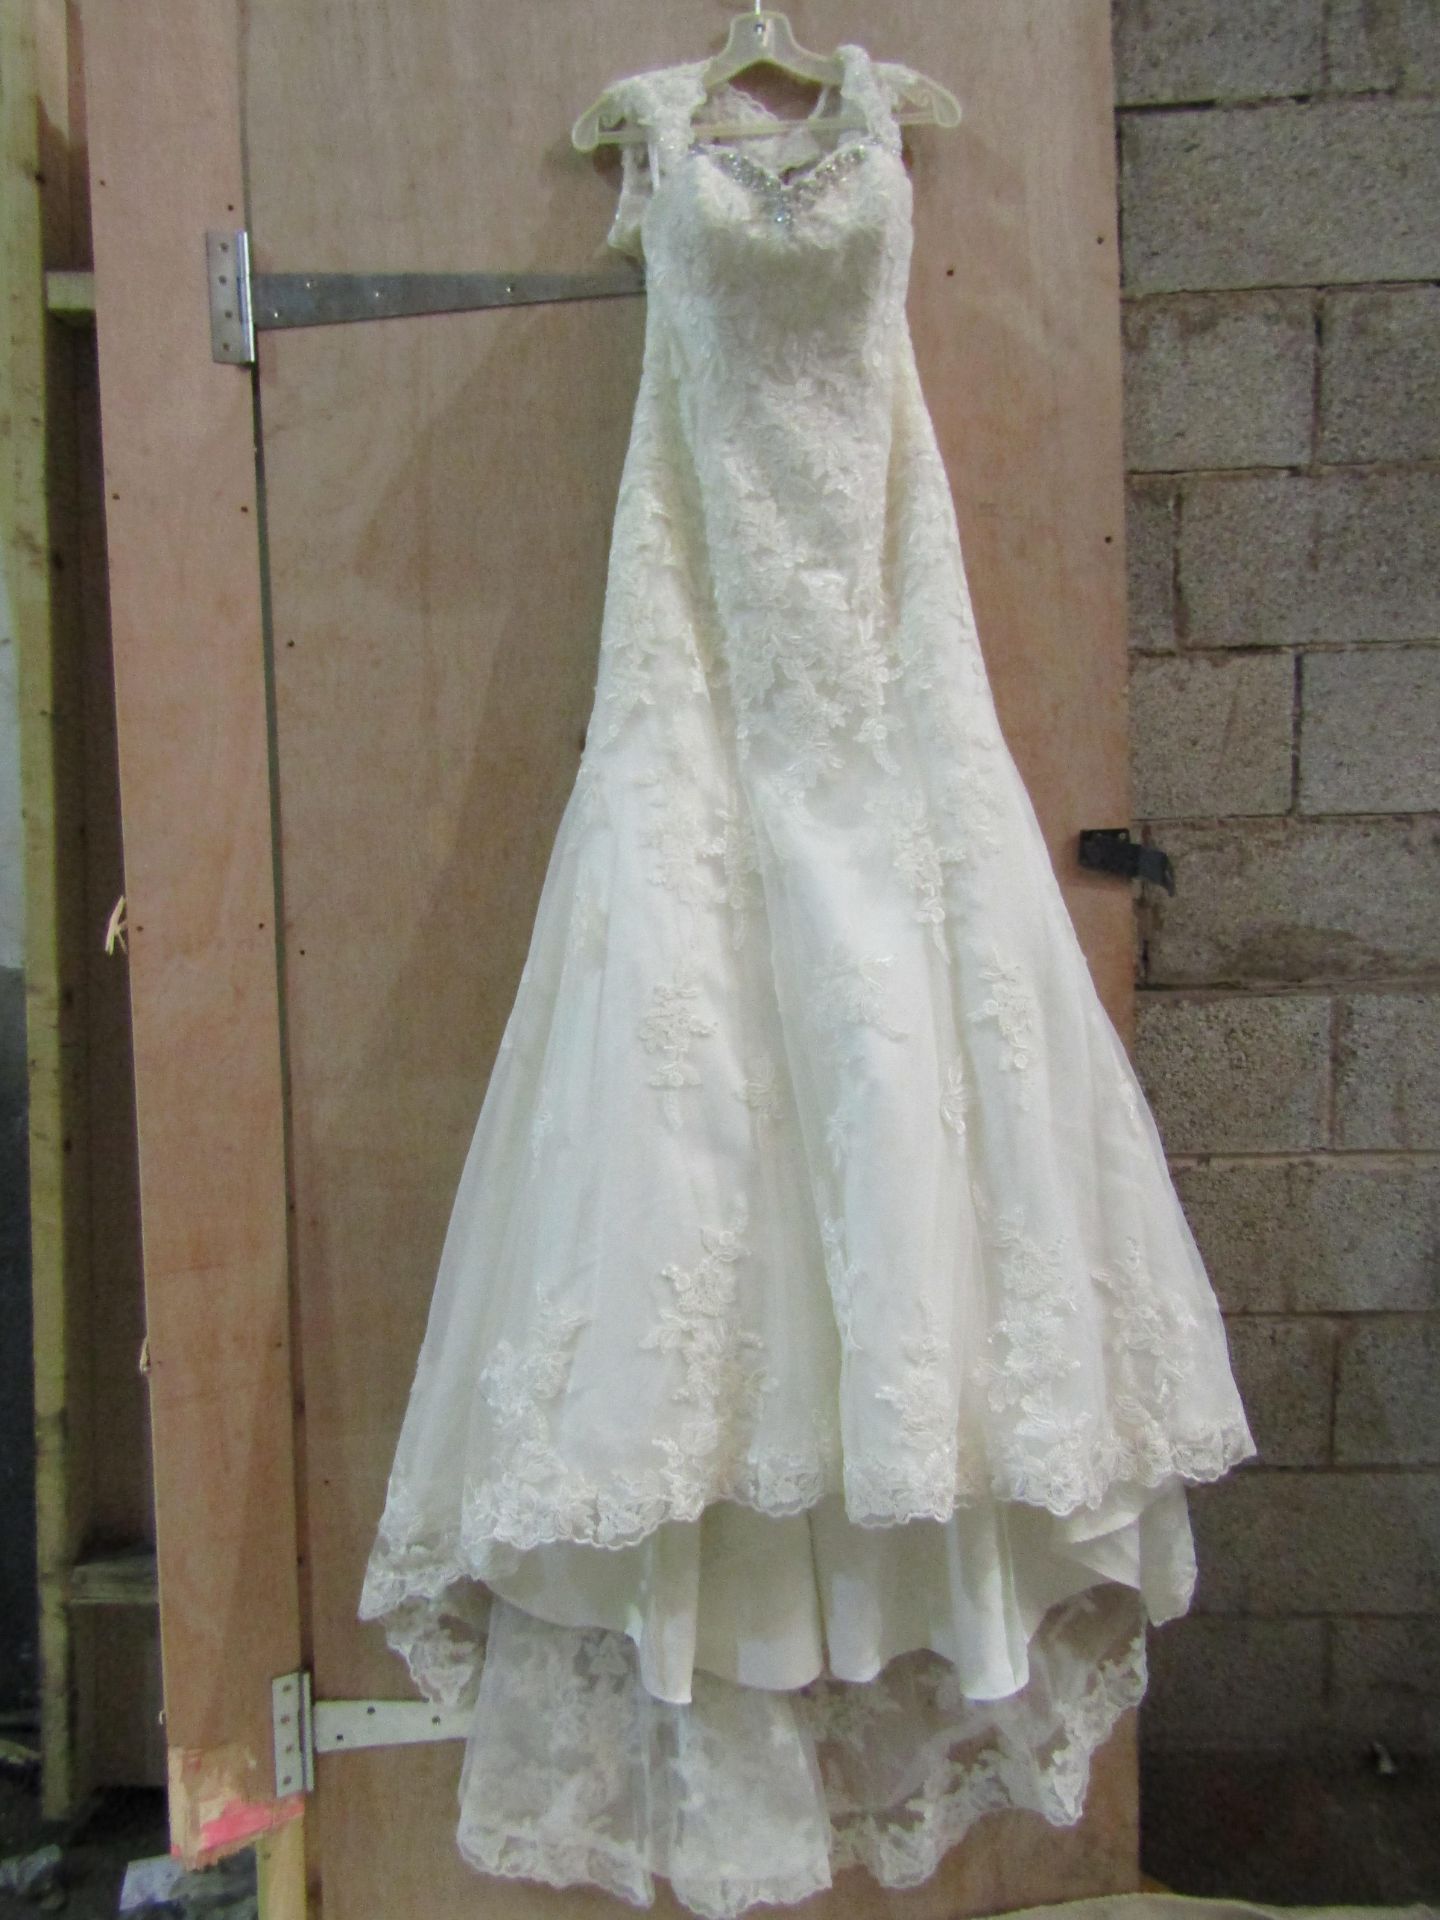 Approx 500 pieces of wedding shop stock to include wedding dresses, mother of the bride, dresses, - Image 100 of 108